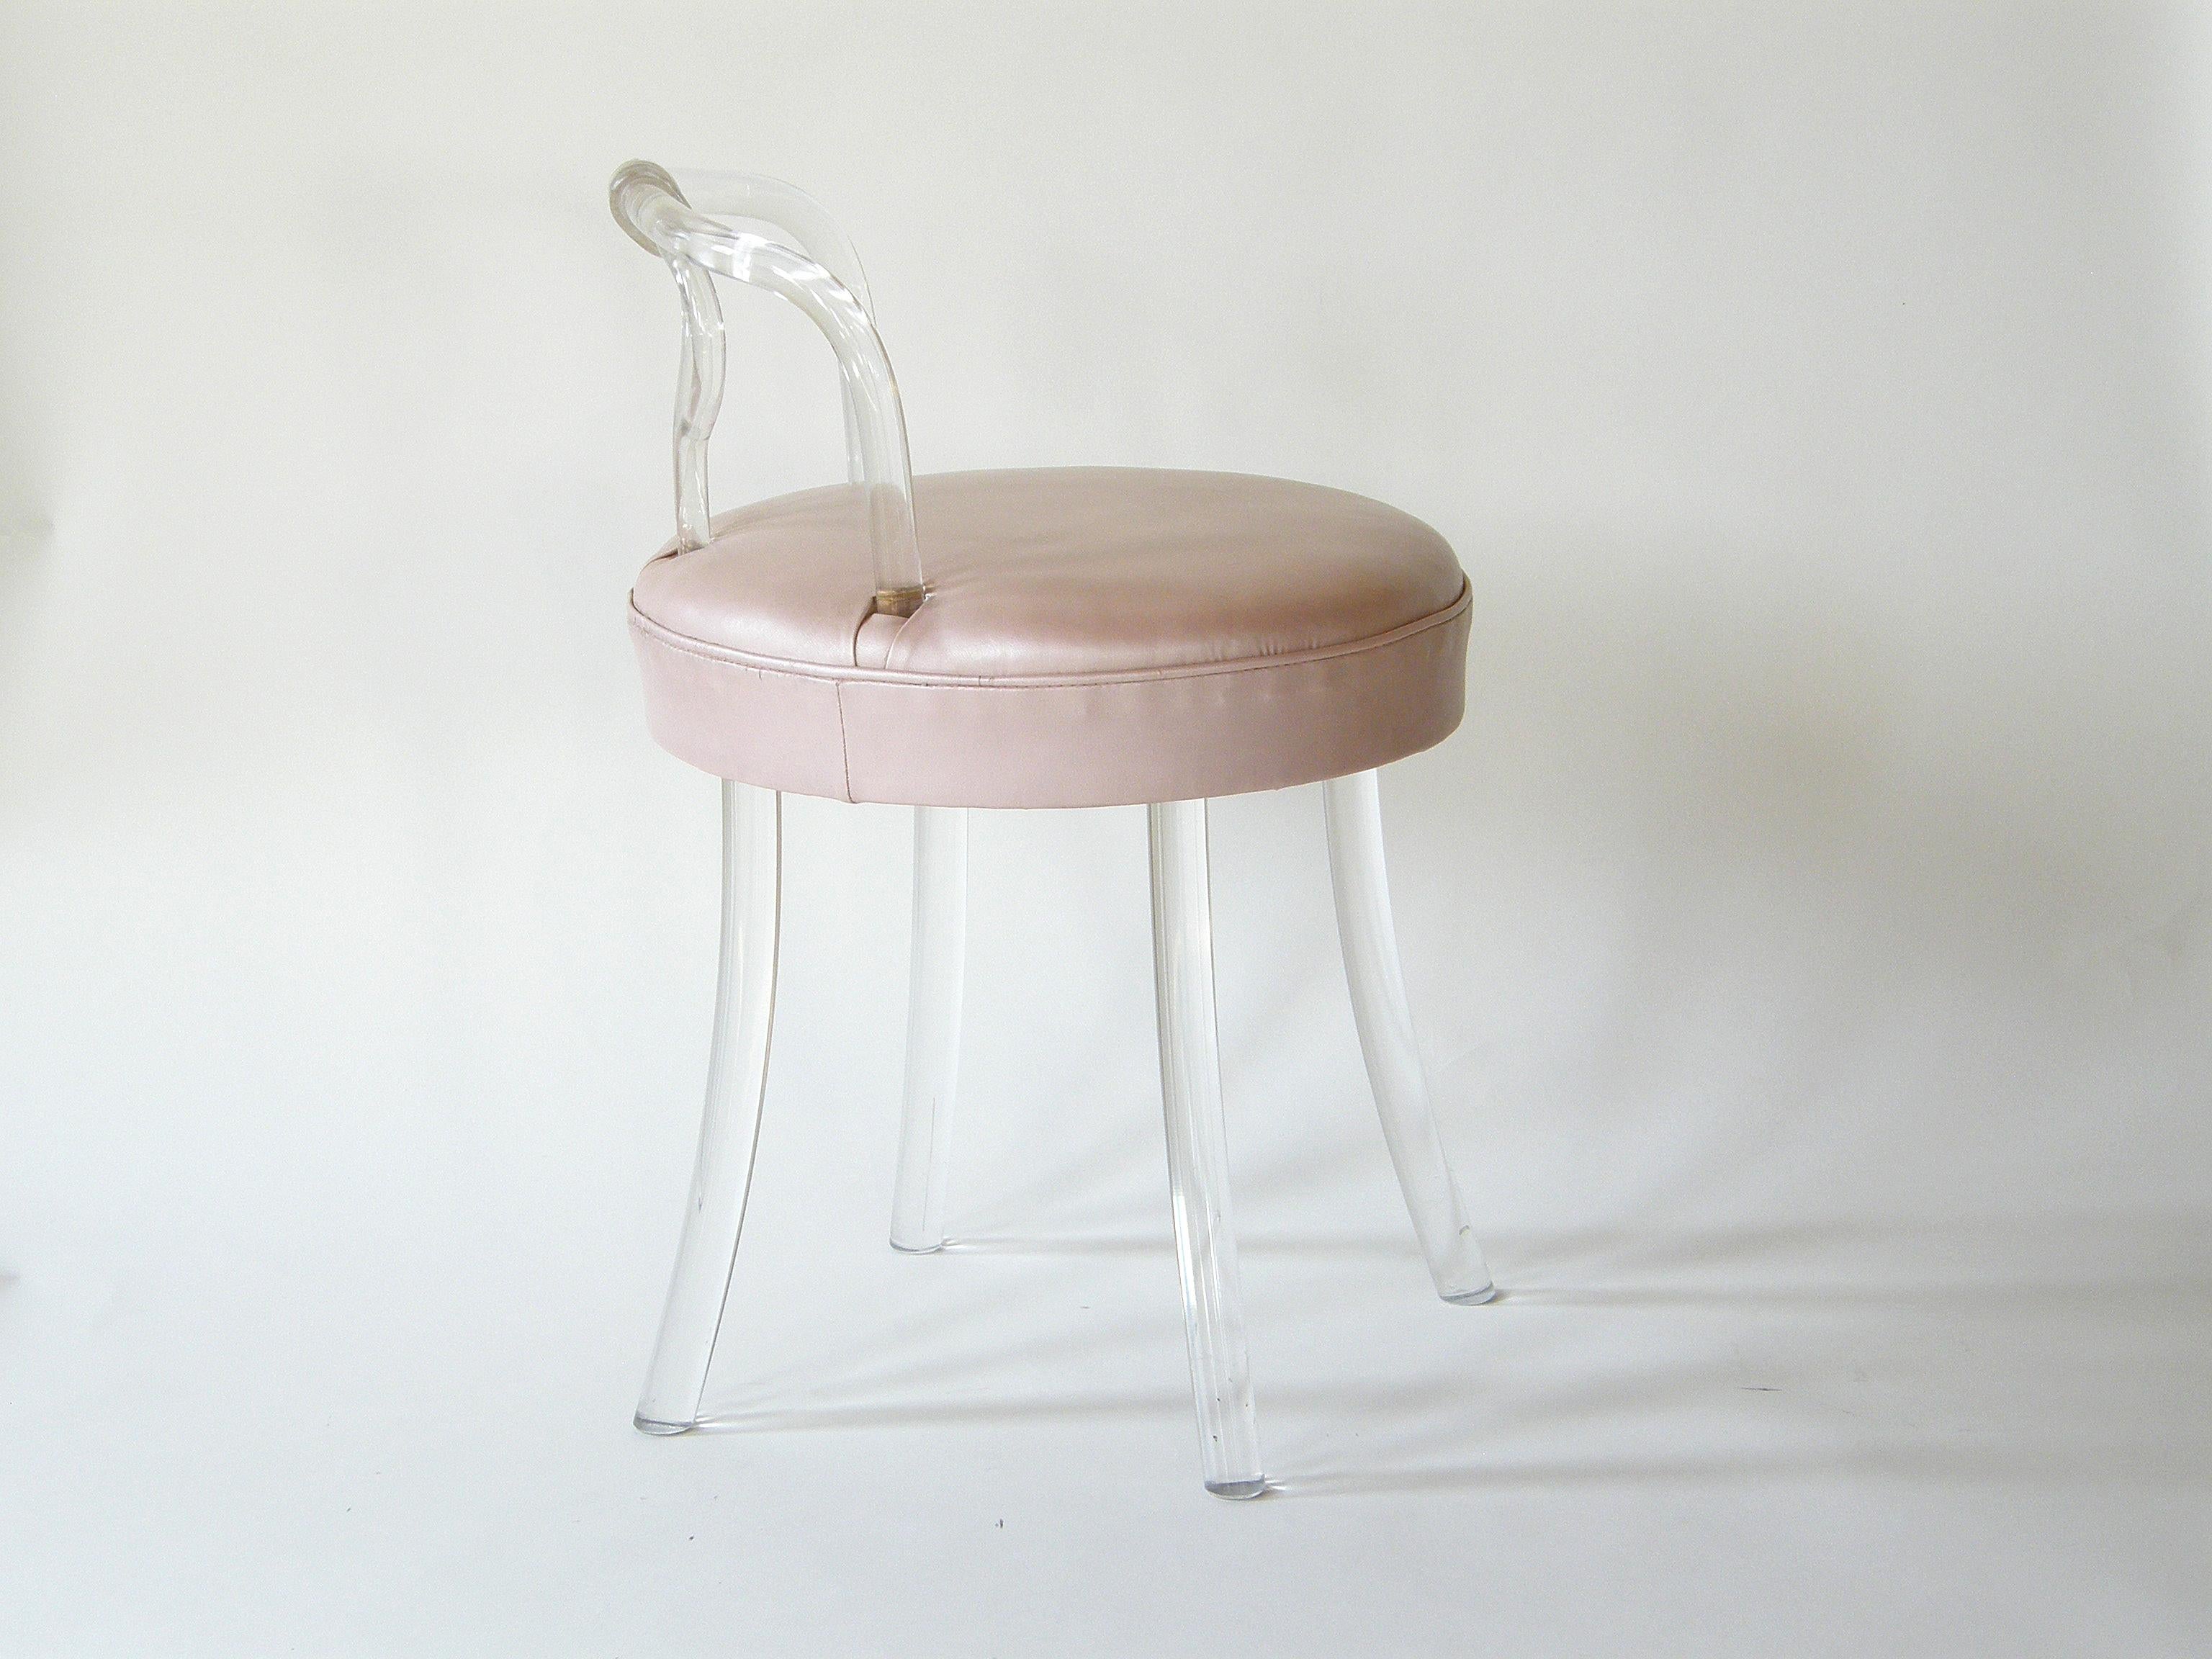 This petite vanity stool evokes the era of 1940s Hollywood glamour. The legs and backrest are made of bent Lucite, and the upholstery is a pale, dusty pink vinyl with a slightly pearlescent finish. The stool has a swiveling base for comfort and